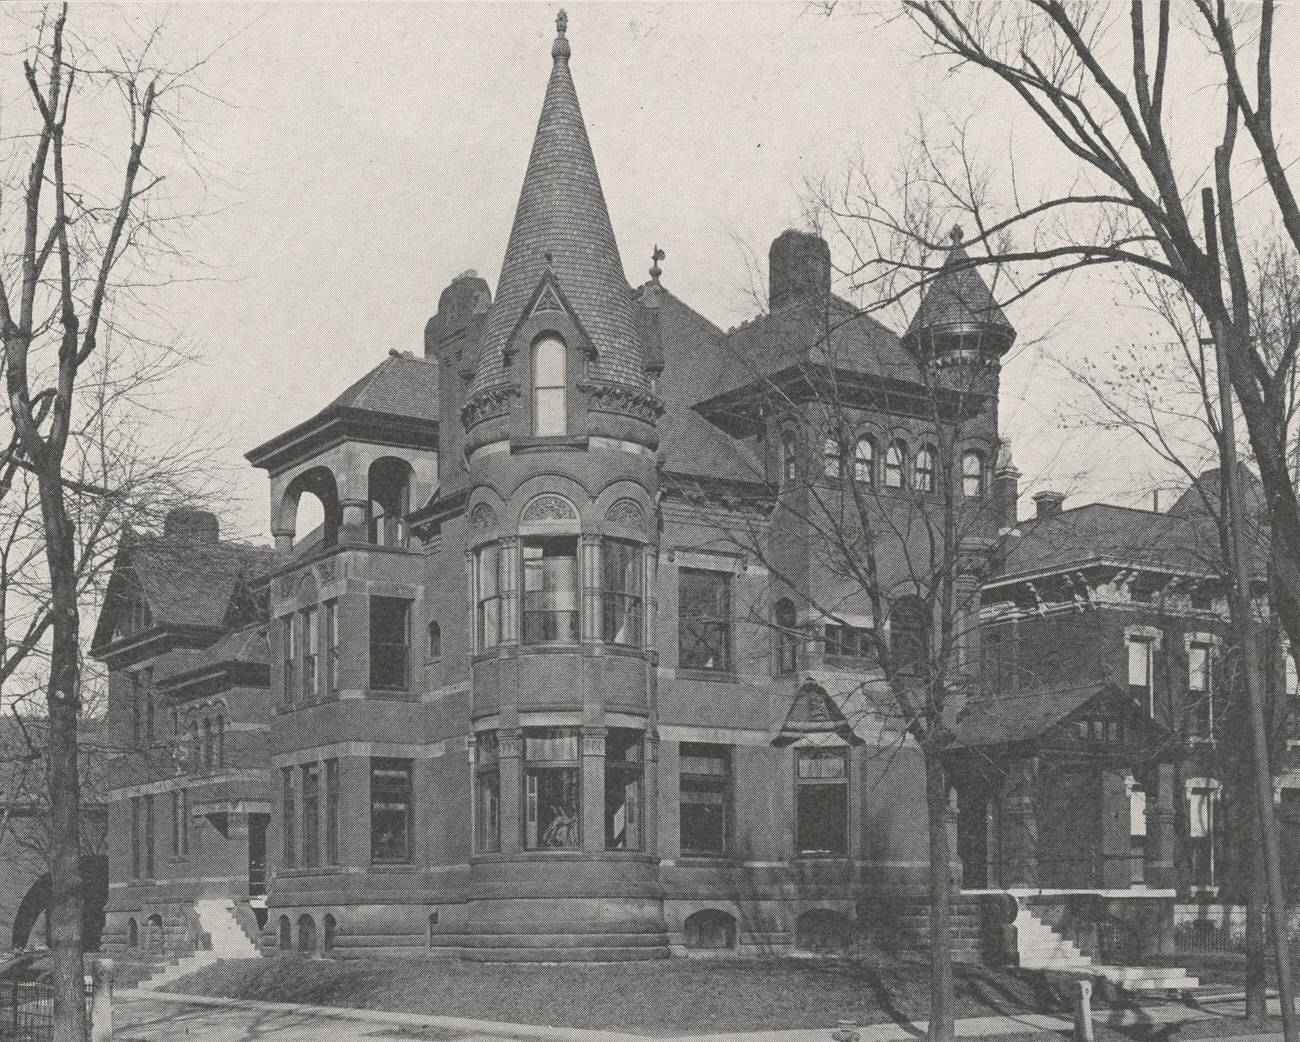 Photograph of the Columbus Mutual Life Insurance Company's building, previously Clinton DeWeese Firestone's mansion, 1915.